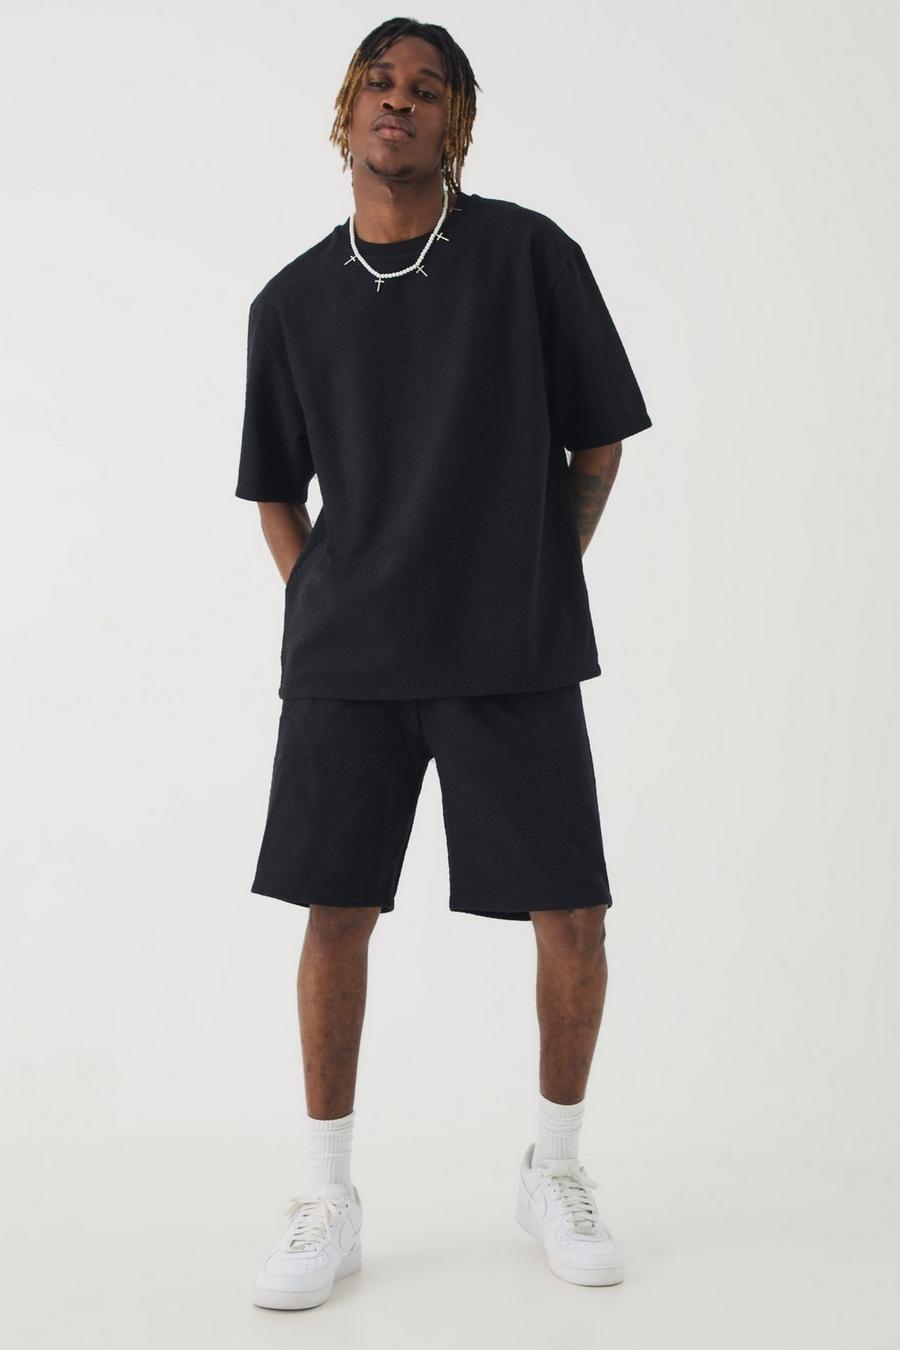 Black Tall Jacquard T-shirt & Relaxed Short image number 1